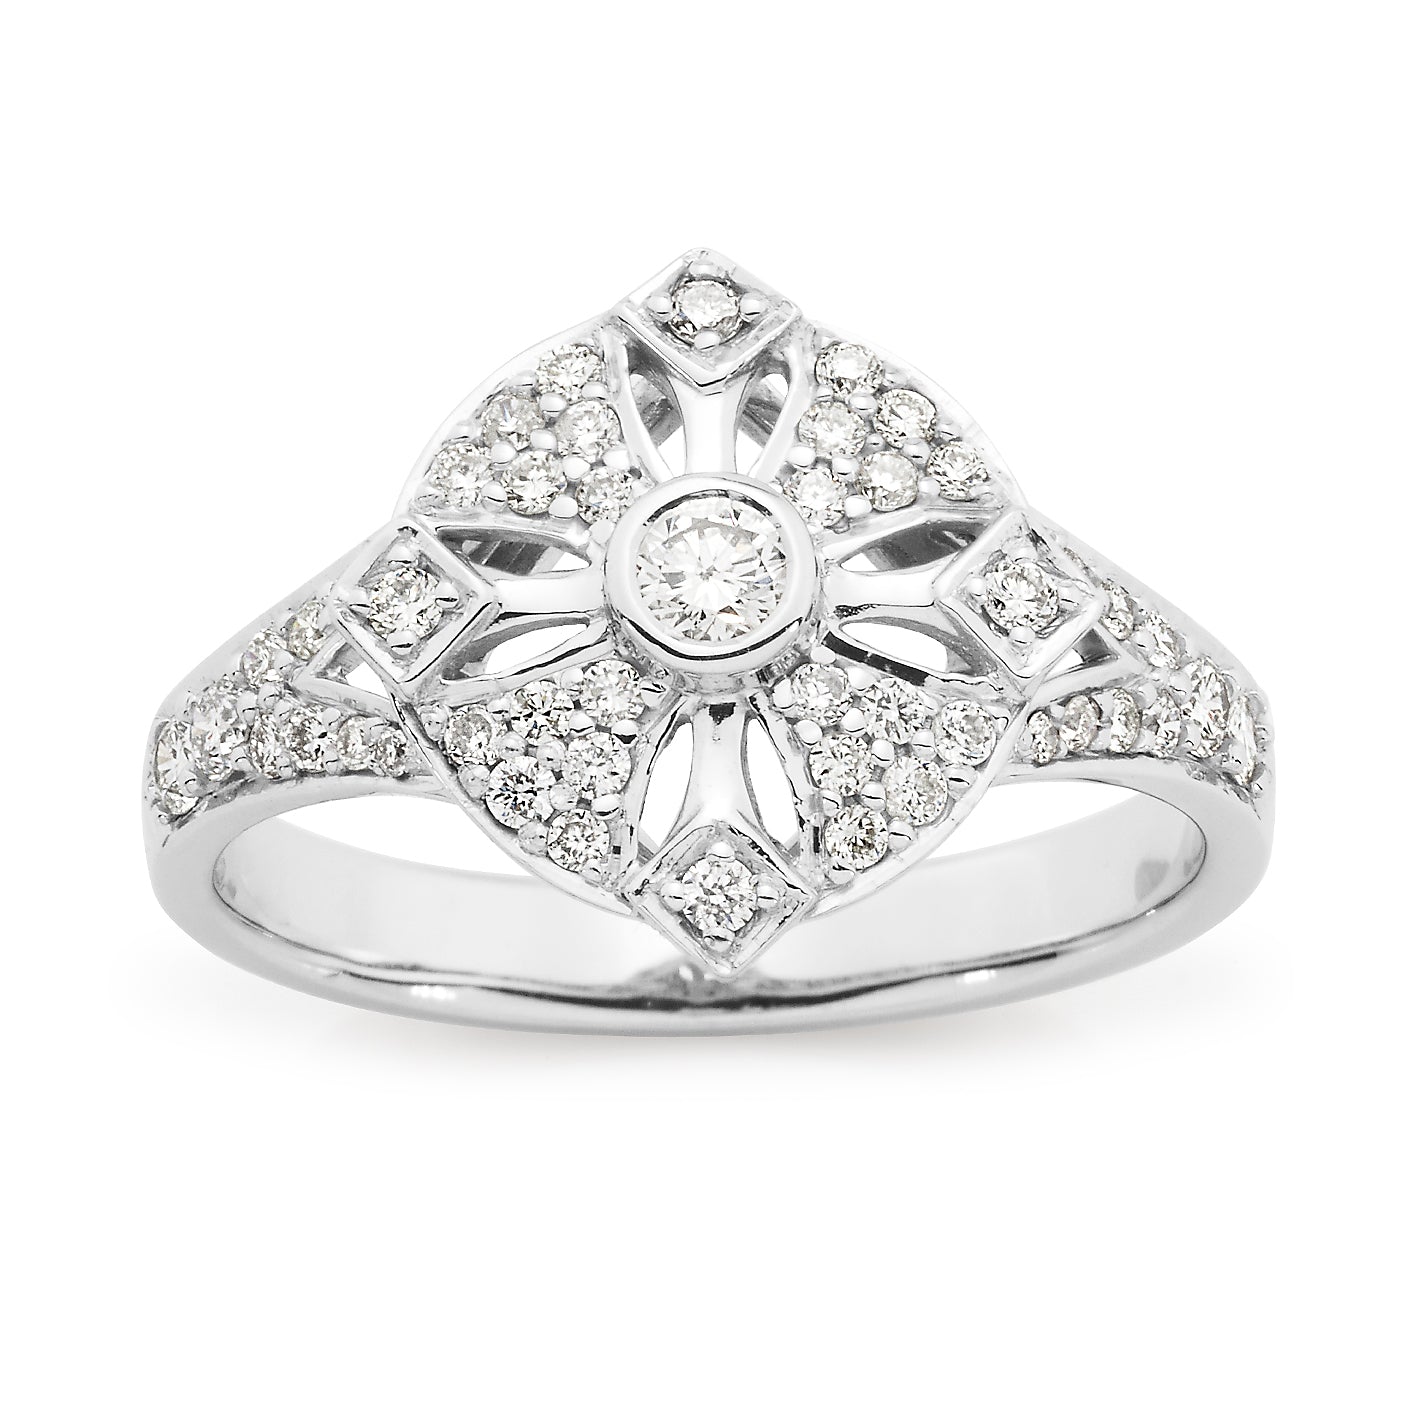 Belle' Art Deco Style Diamond Ring in 9ct White Gold